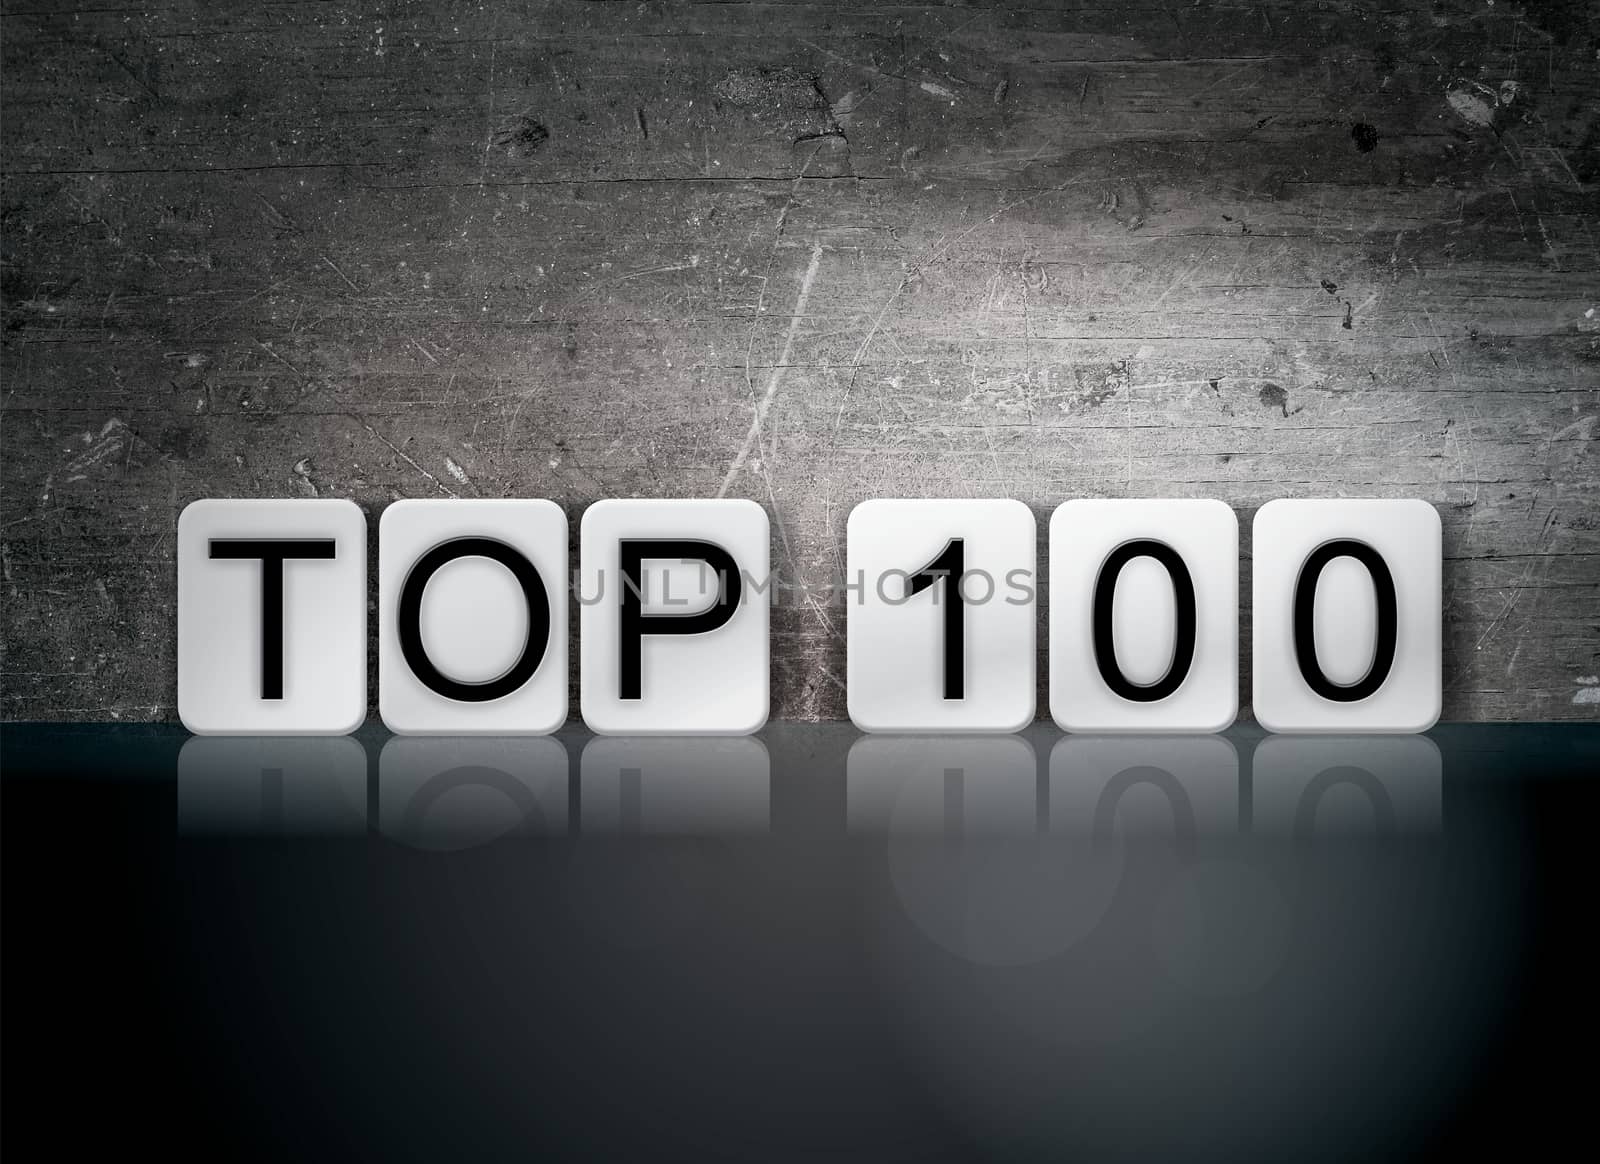 Top 100 Tiled Letters Concept and Theme by enterlinedesign